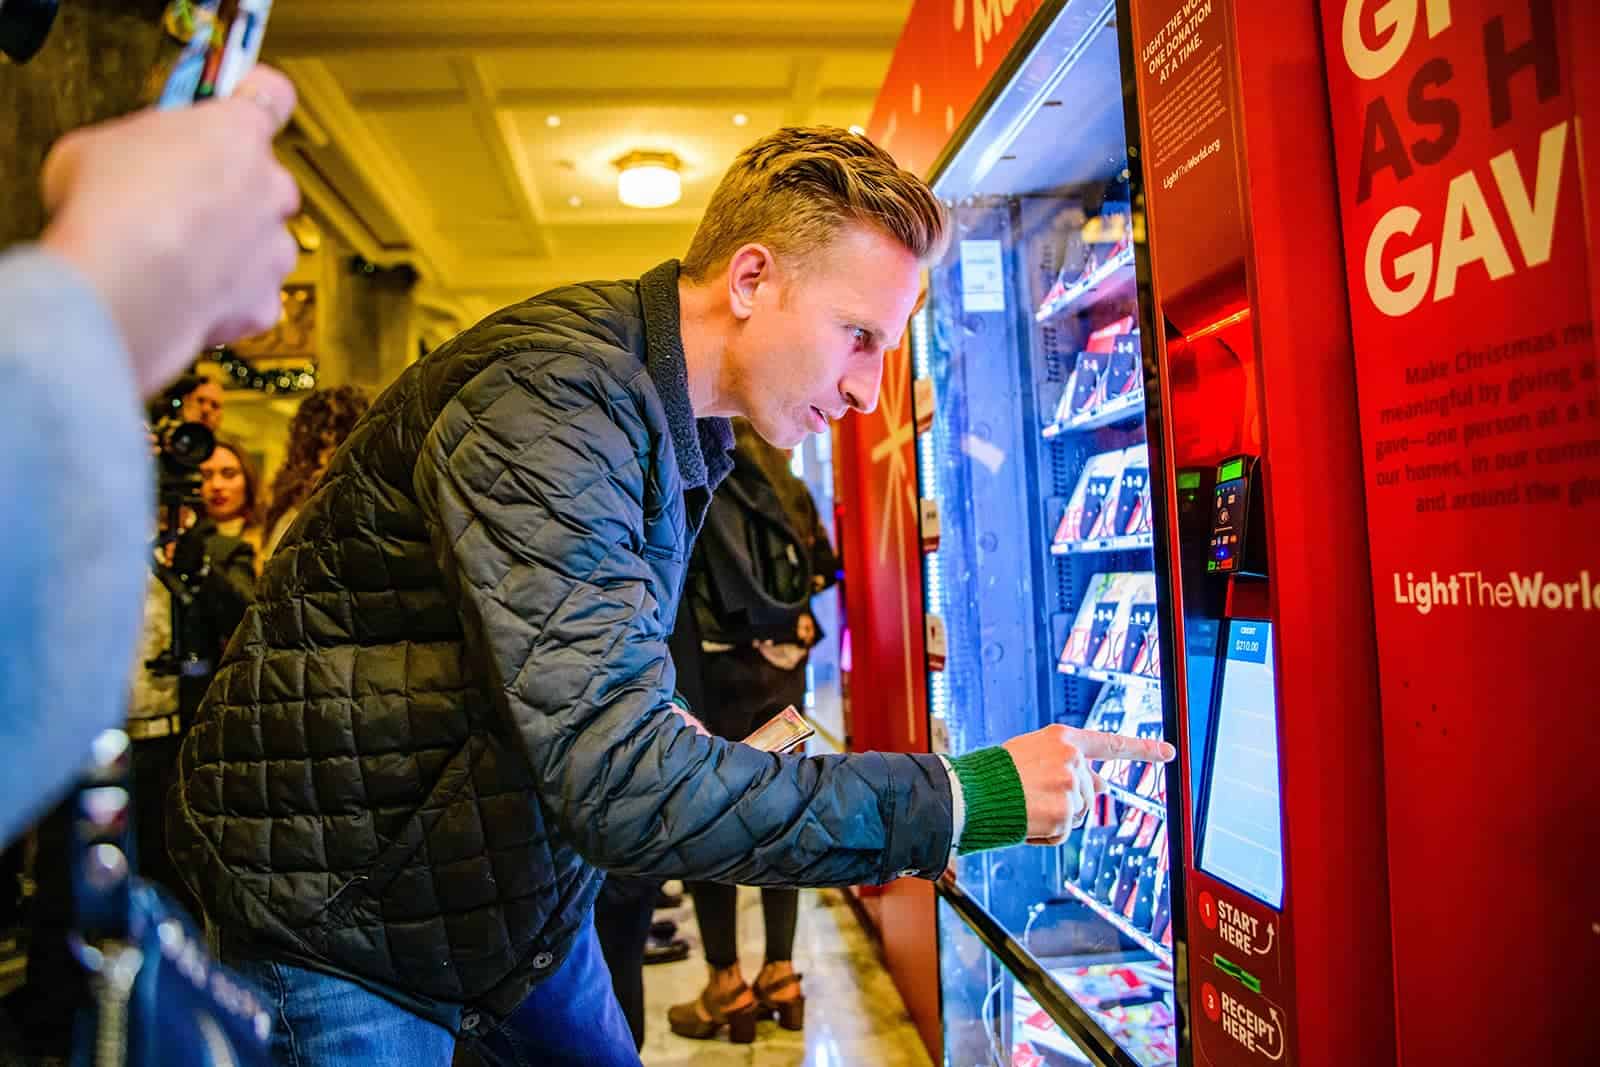 These Utah vending machines dispense some pretty cool things from CBD, chickens, and creative fiction.